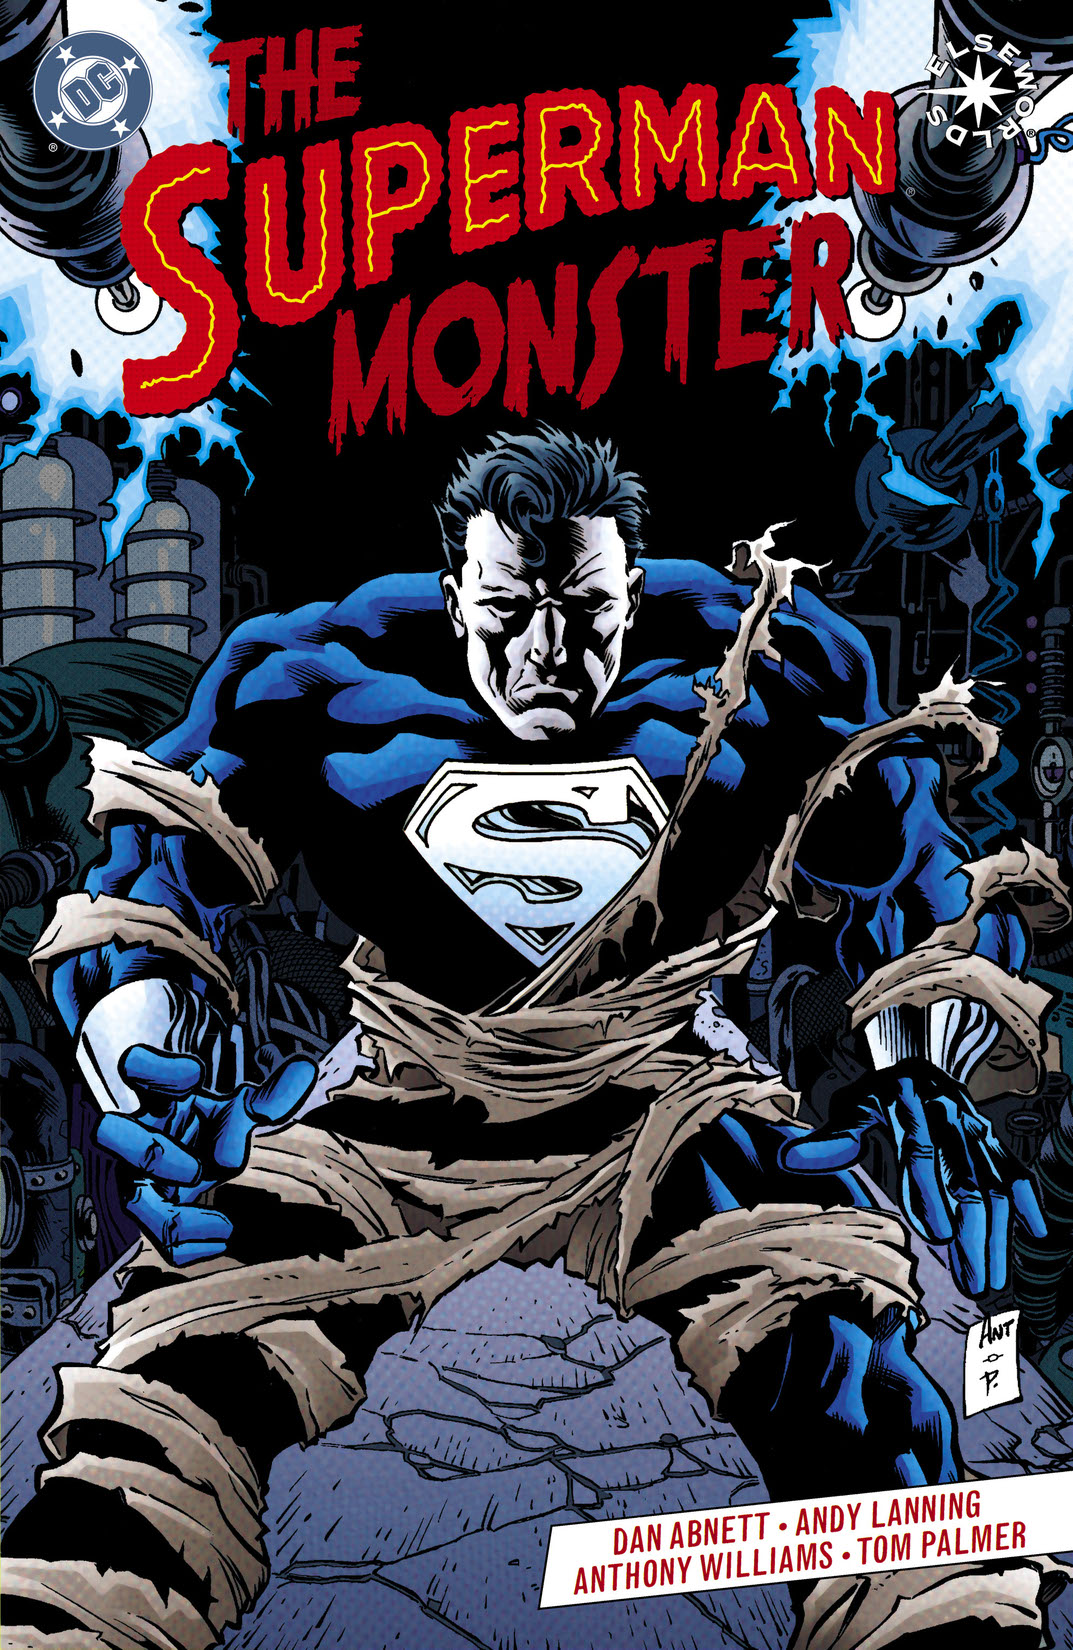 The Superman Monster #1 preview images